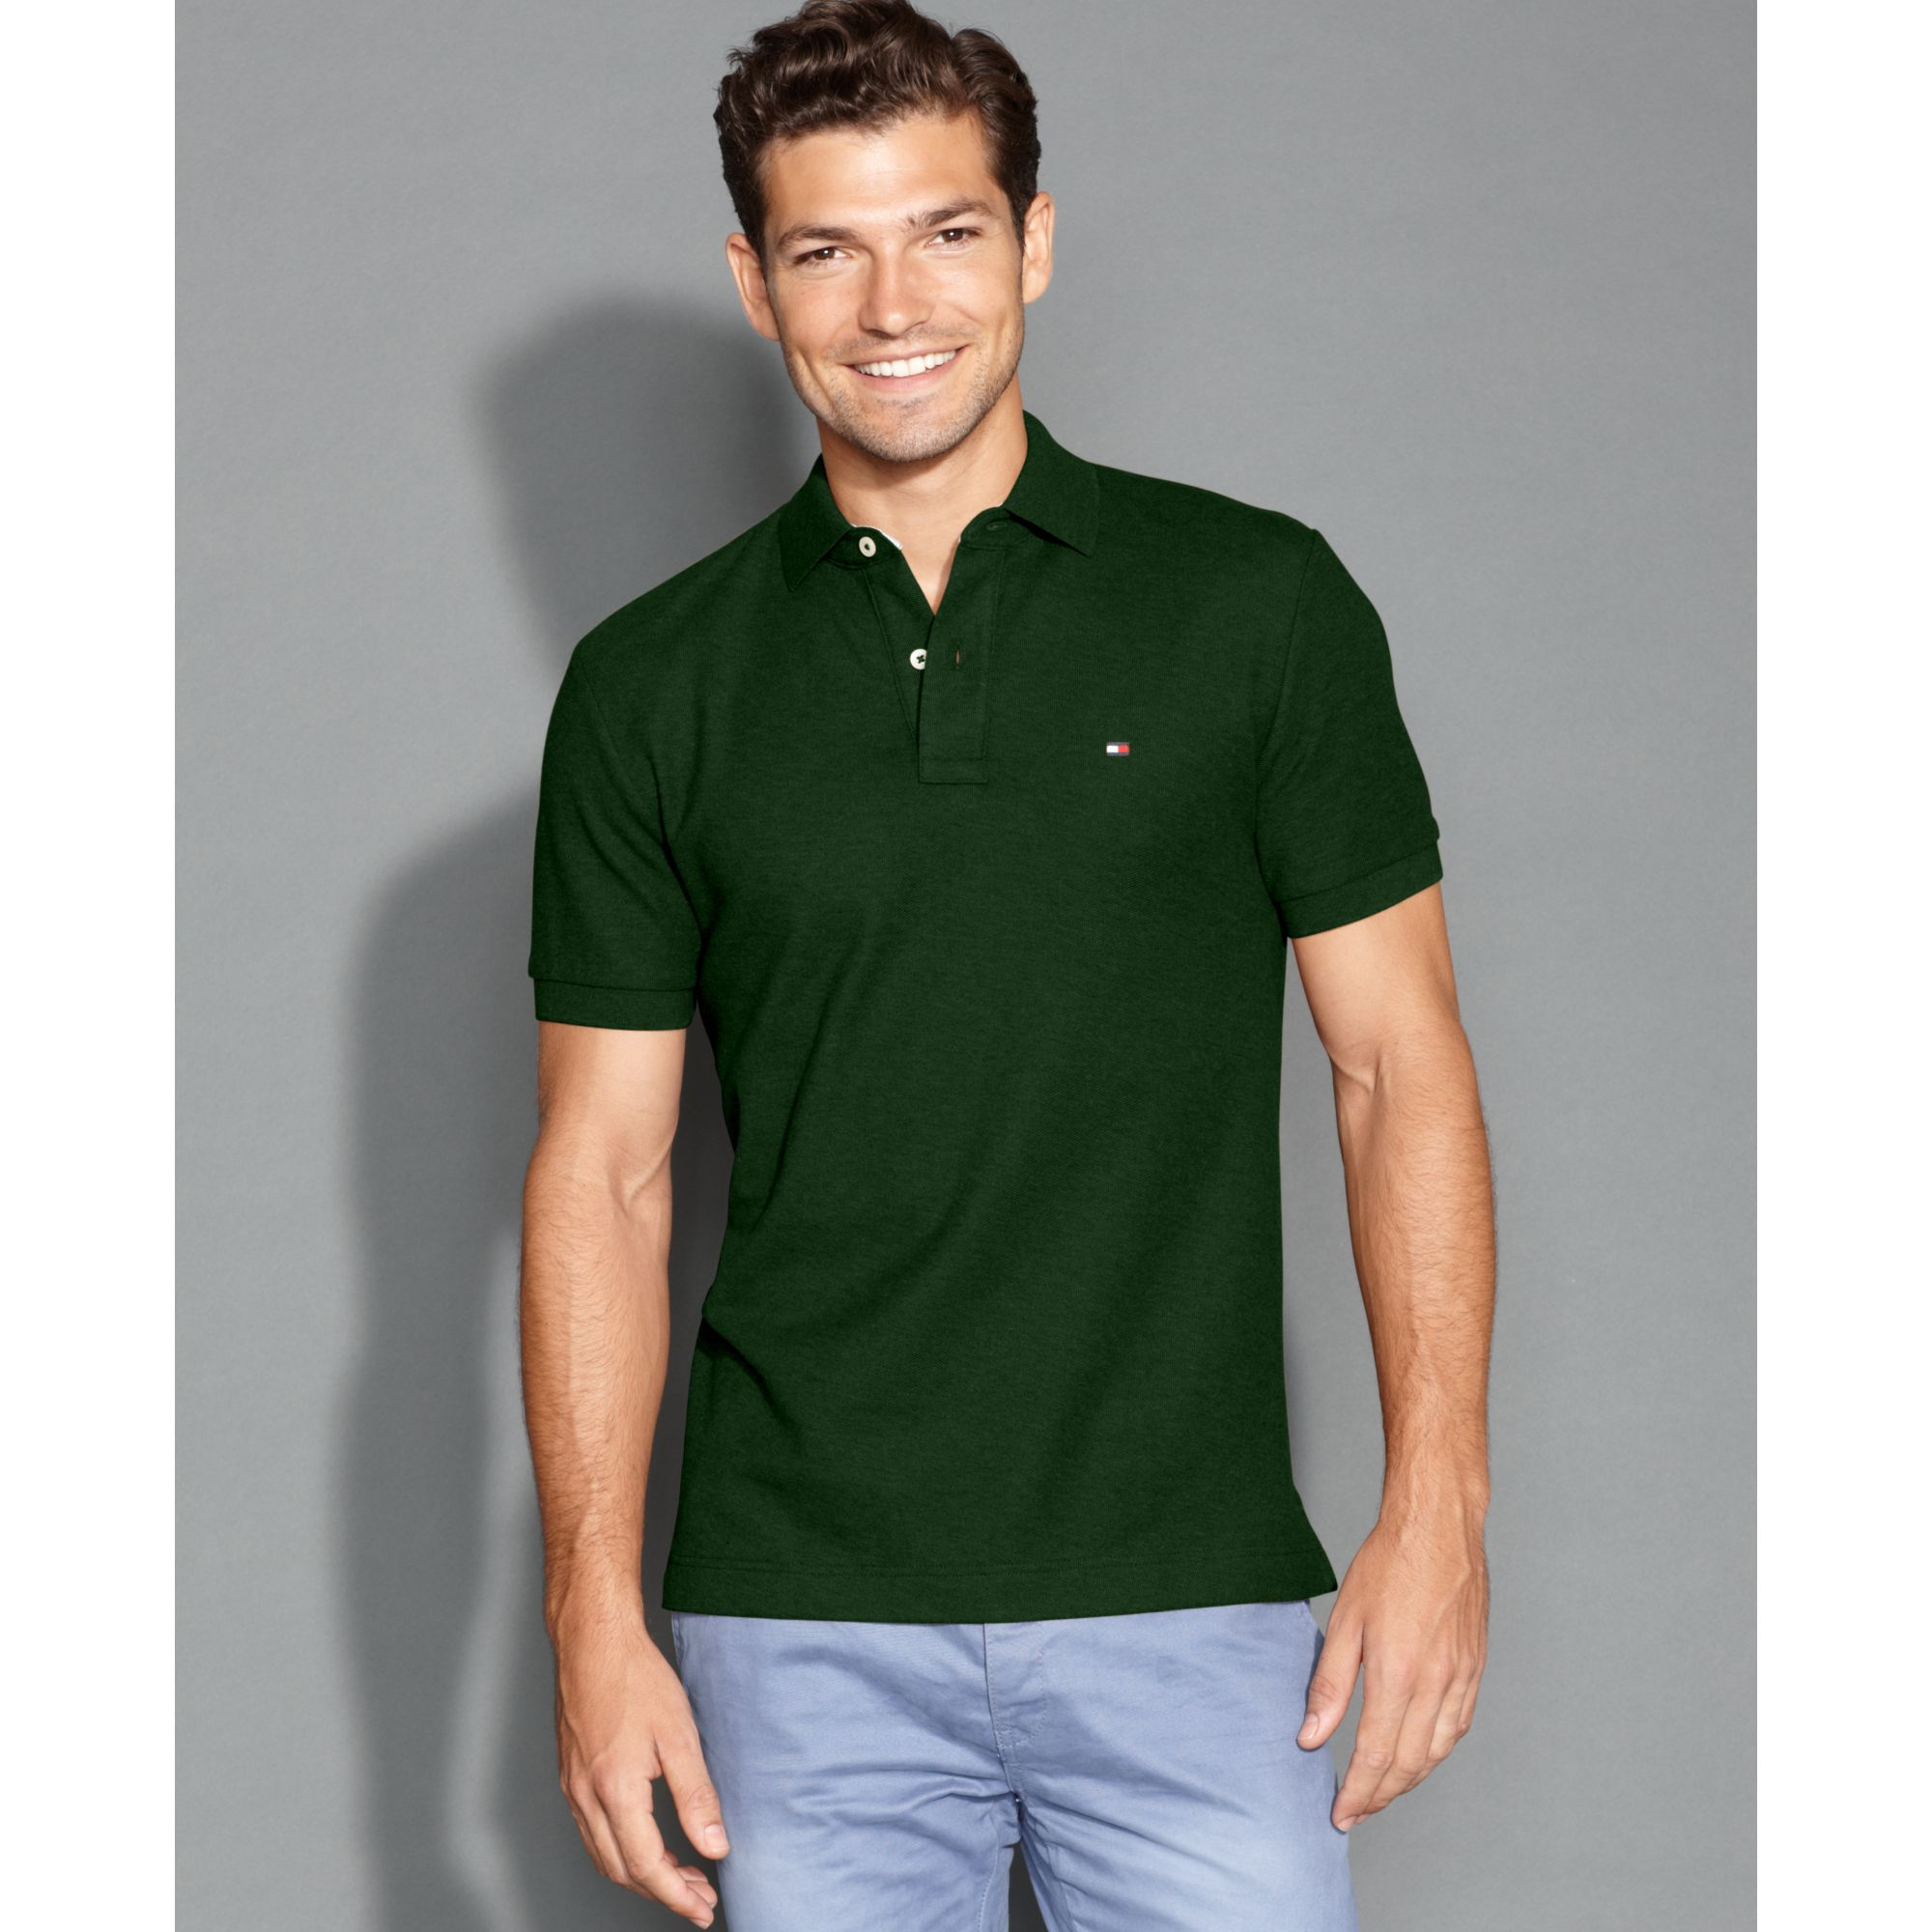 tommy hilfiger polo shirt green